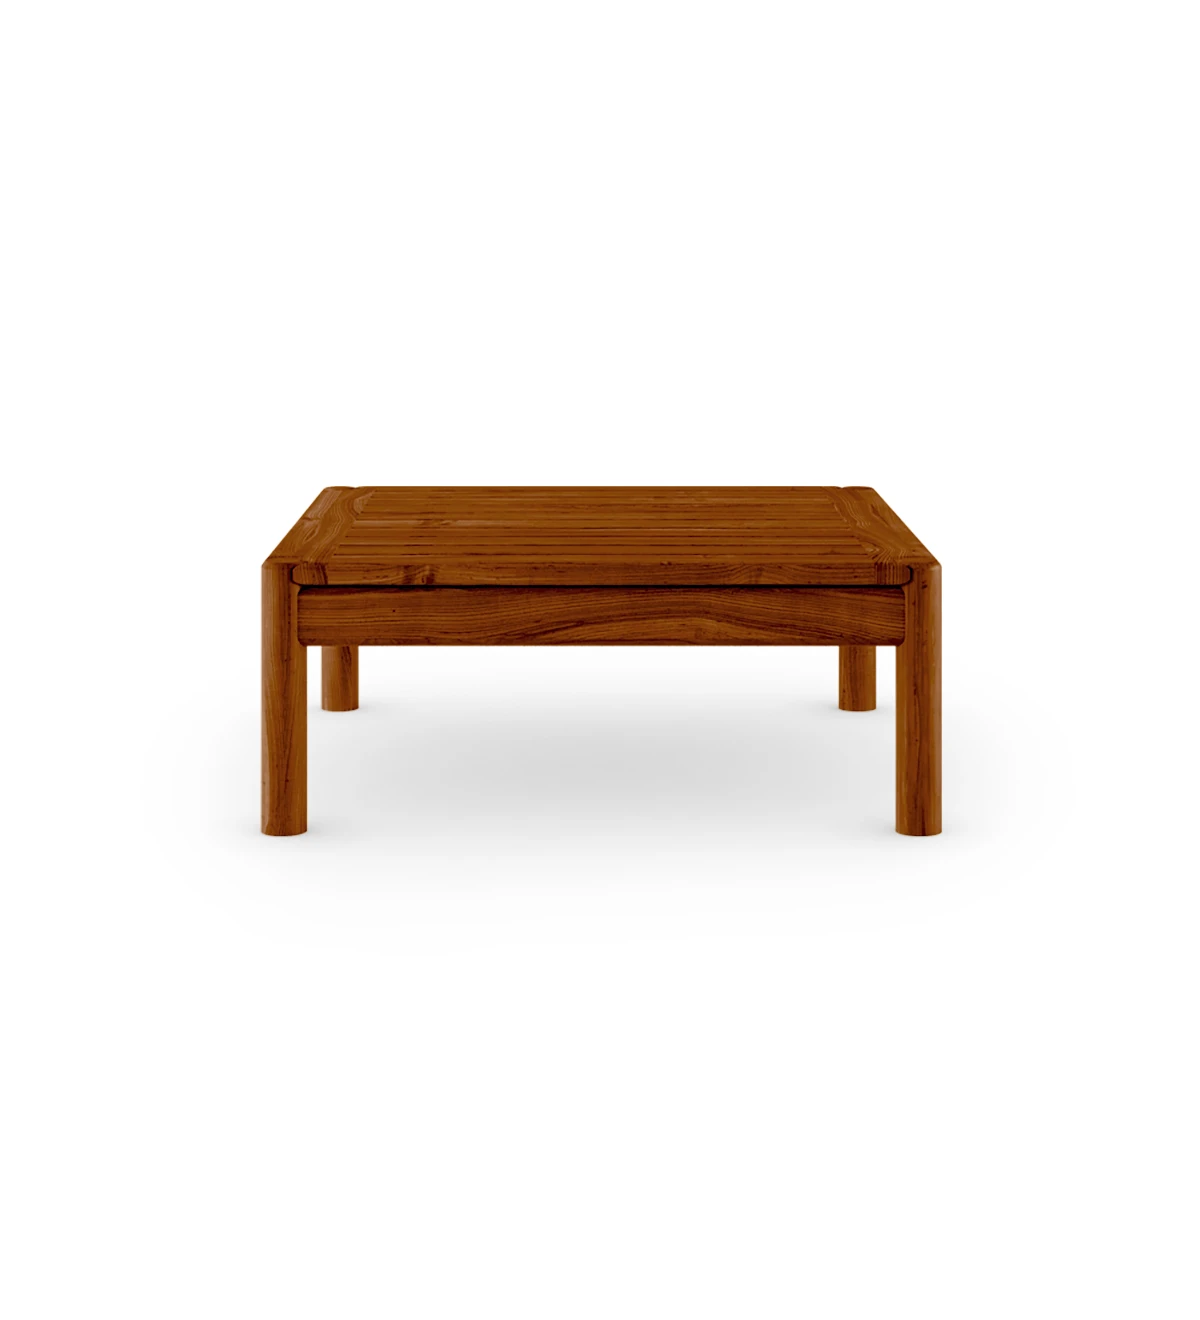 Square coffee table in honey-colored natural wood.